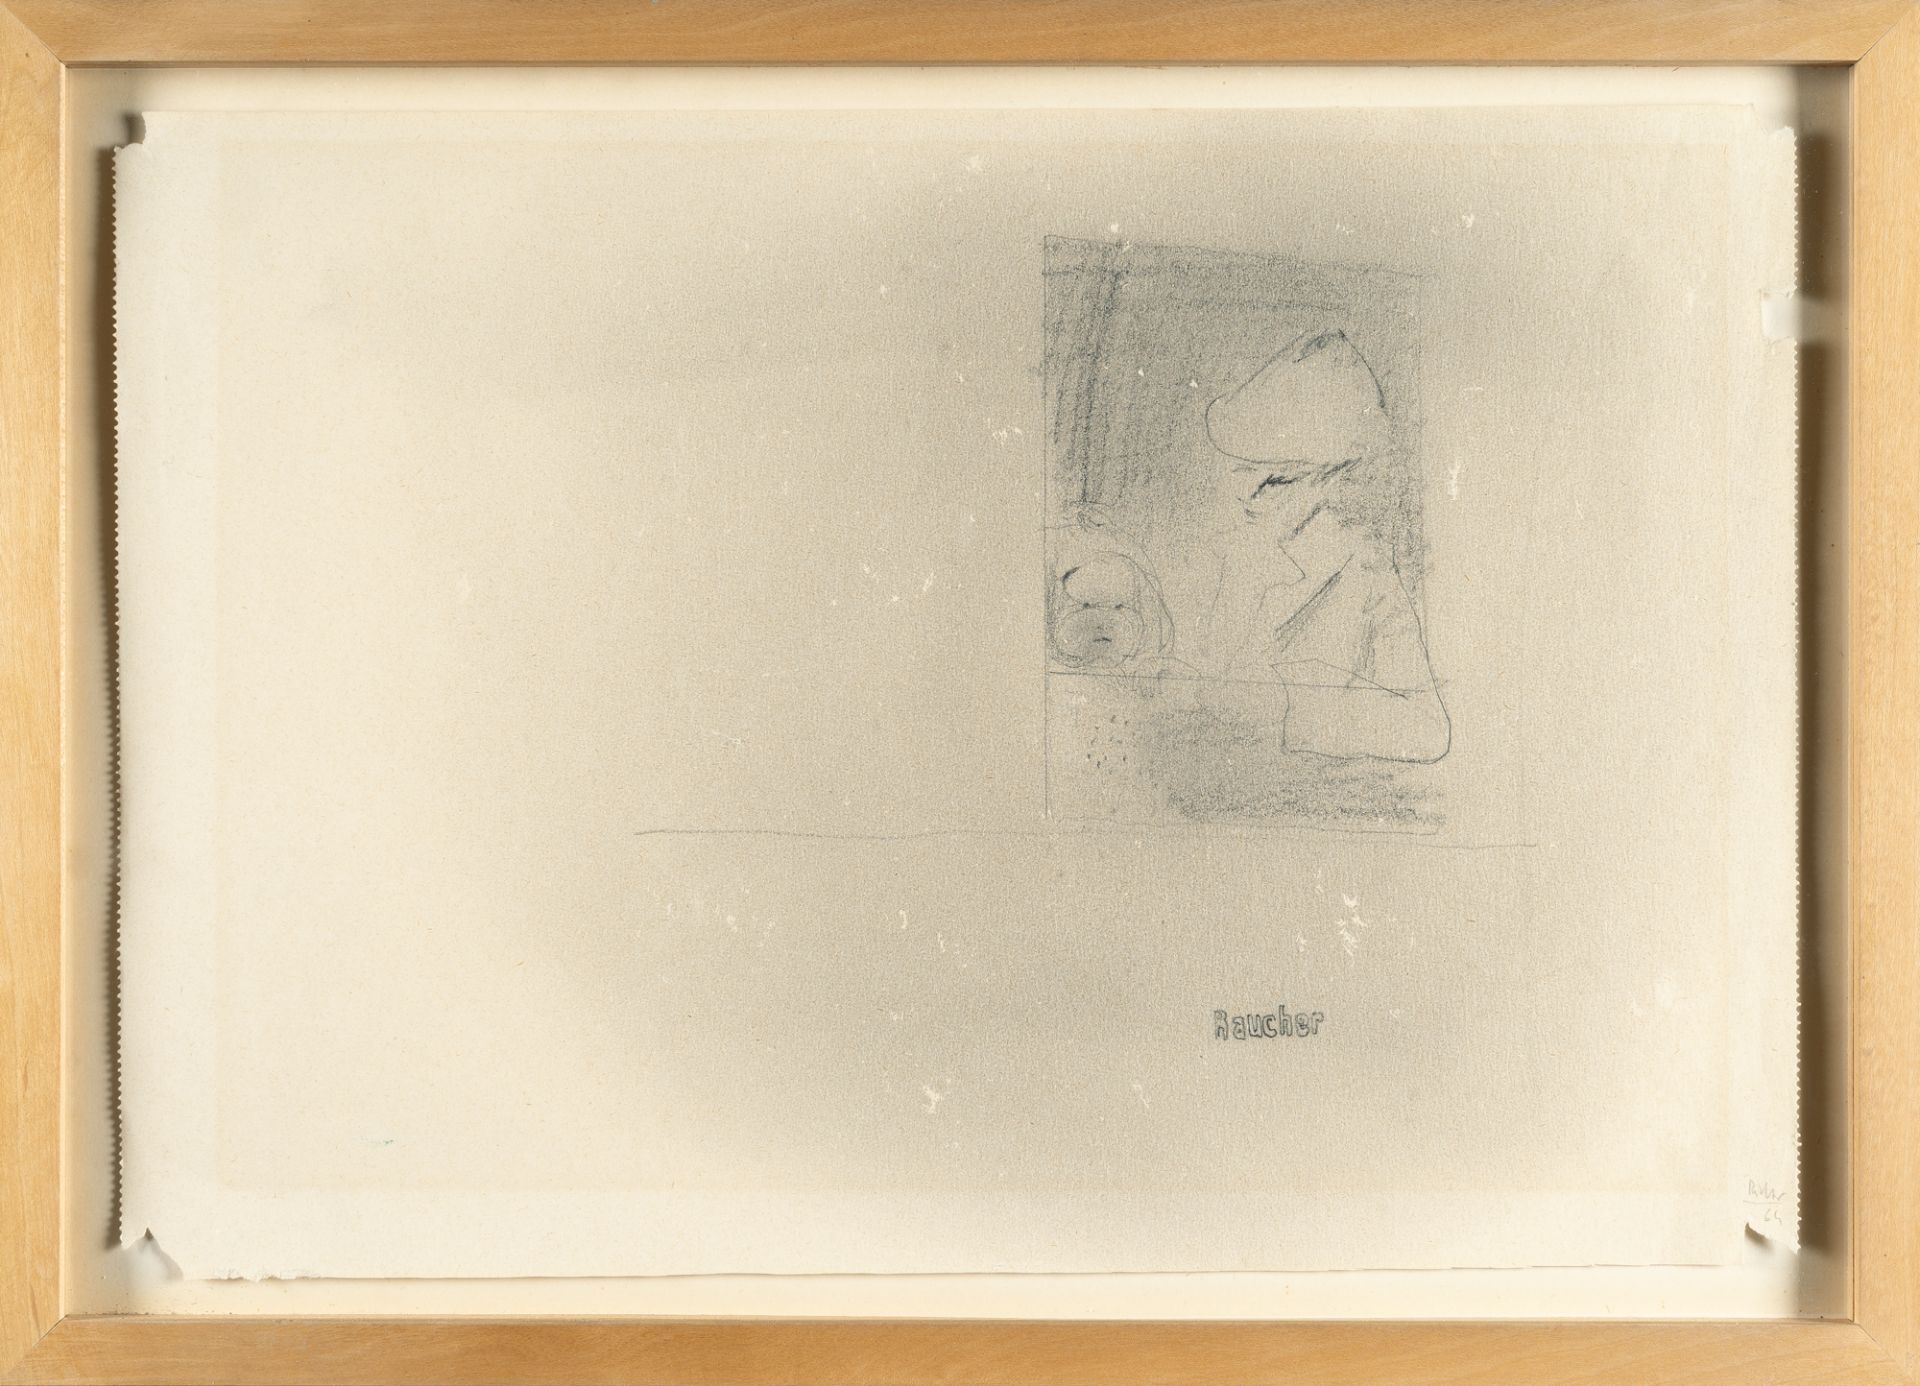 Gerhard Richter (1932 Dresden), “Smoker”Pencil on paper. (19)64. Ca. 27.5 x 39.5 cm. Signed and - Image 4 of 4